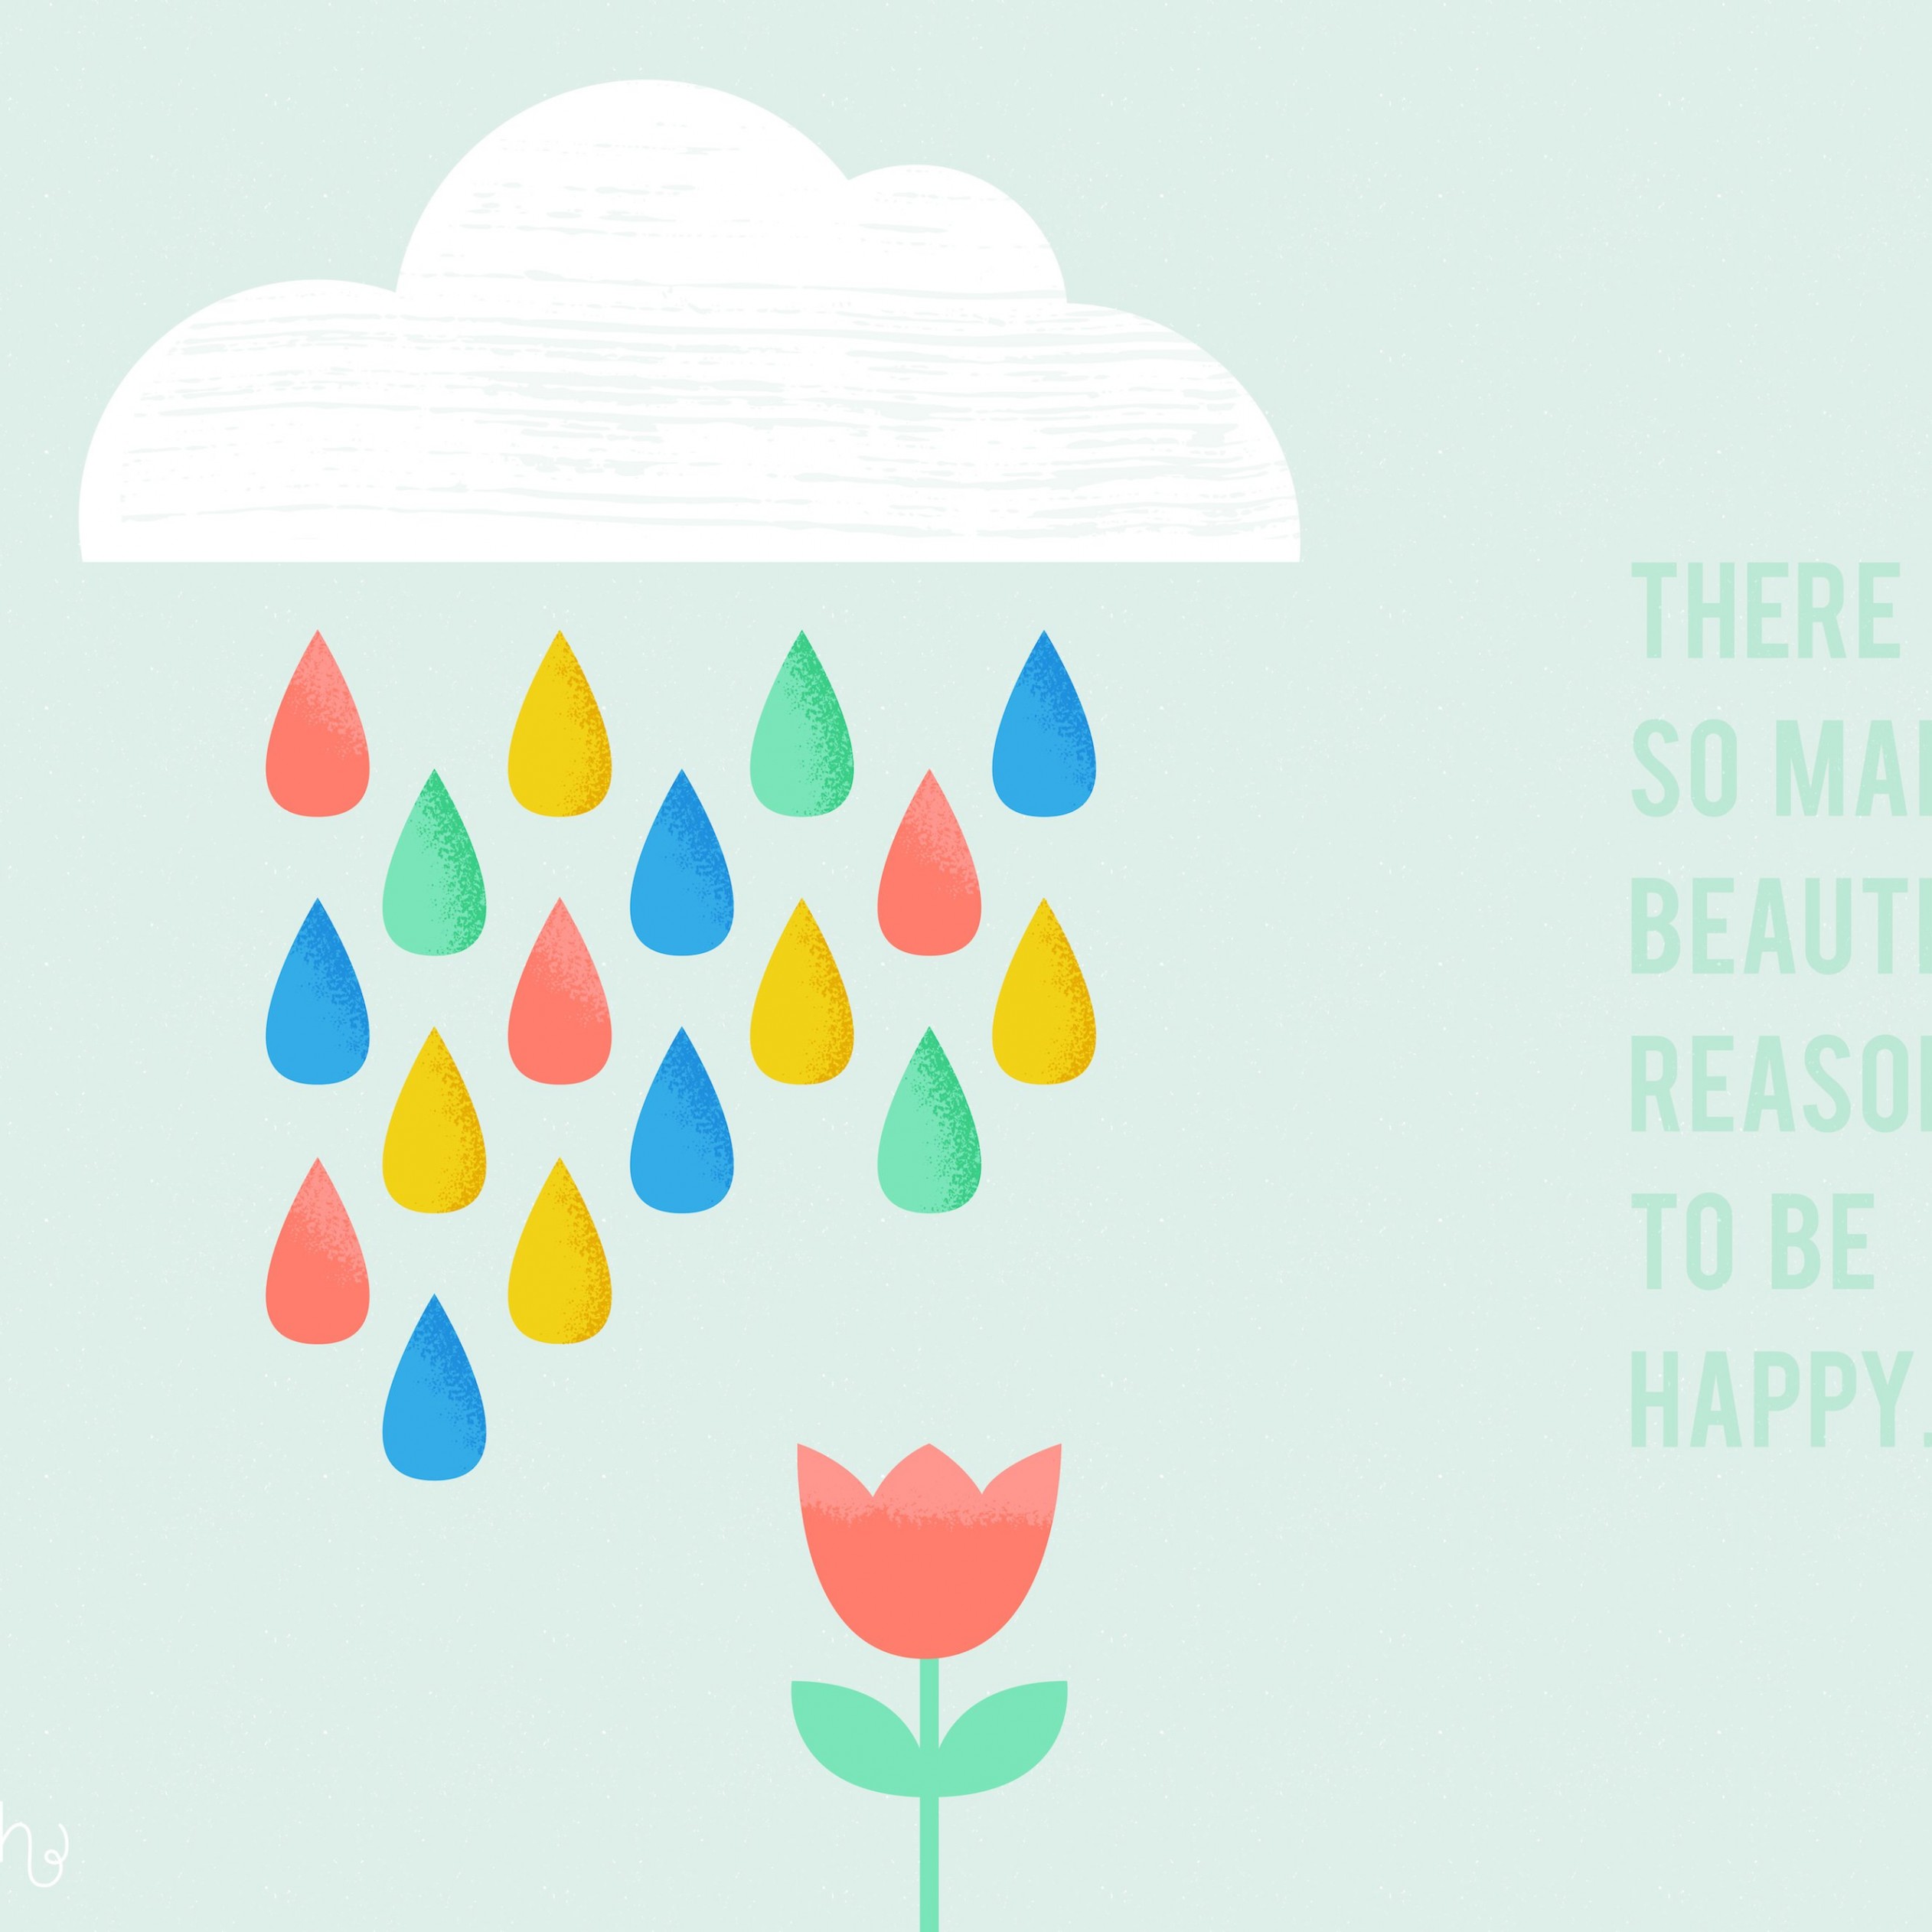 There are so many reasons to be happy Wallpaper for Apple iPad mini 2